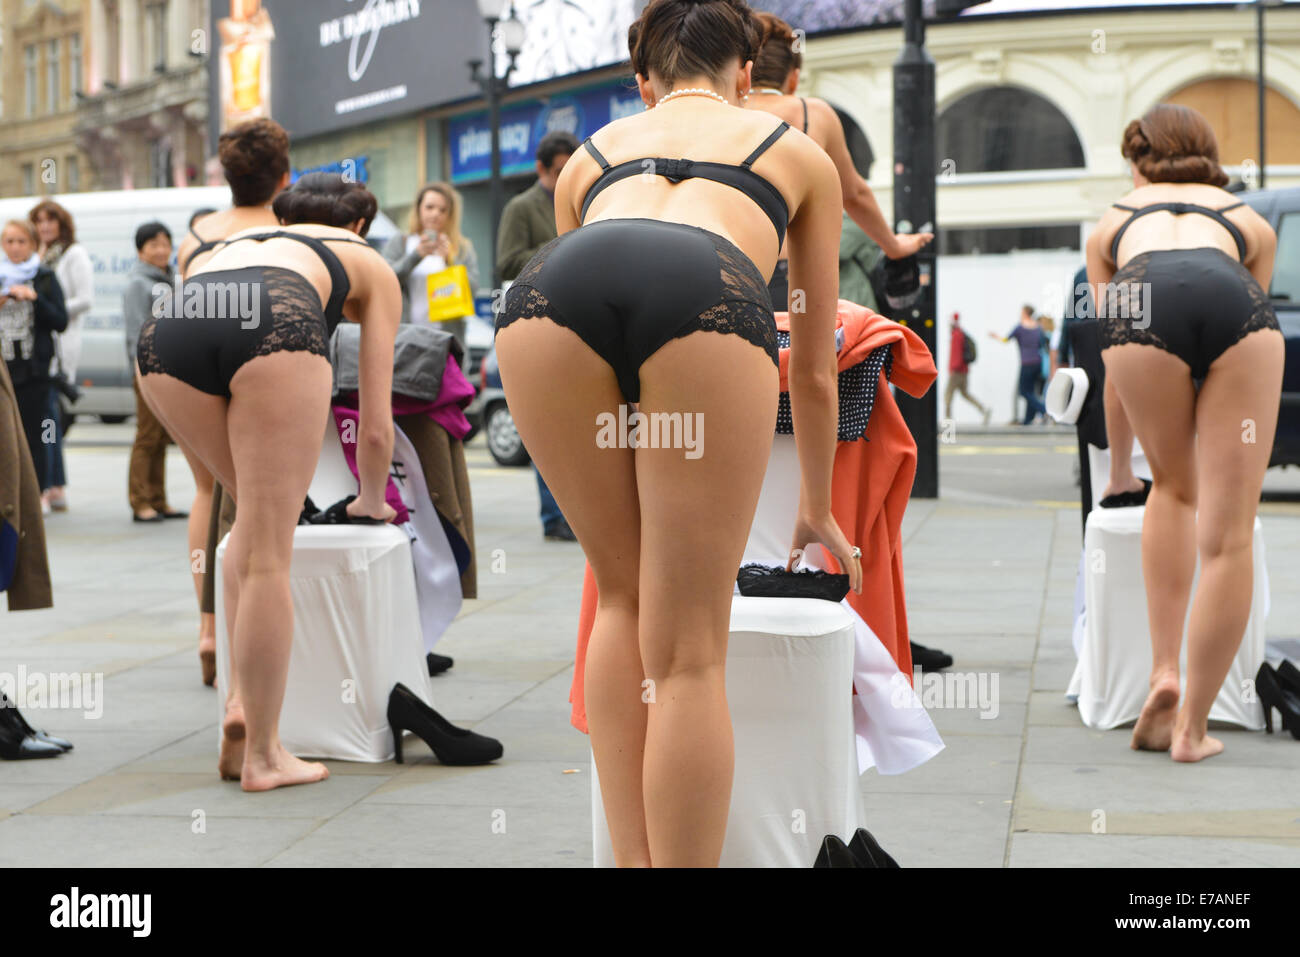 pop Uithoudingsvermogen Bij elkaar passen Piccadilly Circus, London, UK. 11th September 2014. A reverse strip tease  is performed by the Peter Hahn, Dresstease flashmob. Credit: Matthew  Chattle/Alamy Live News Stock Photo - Alamy